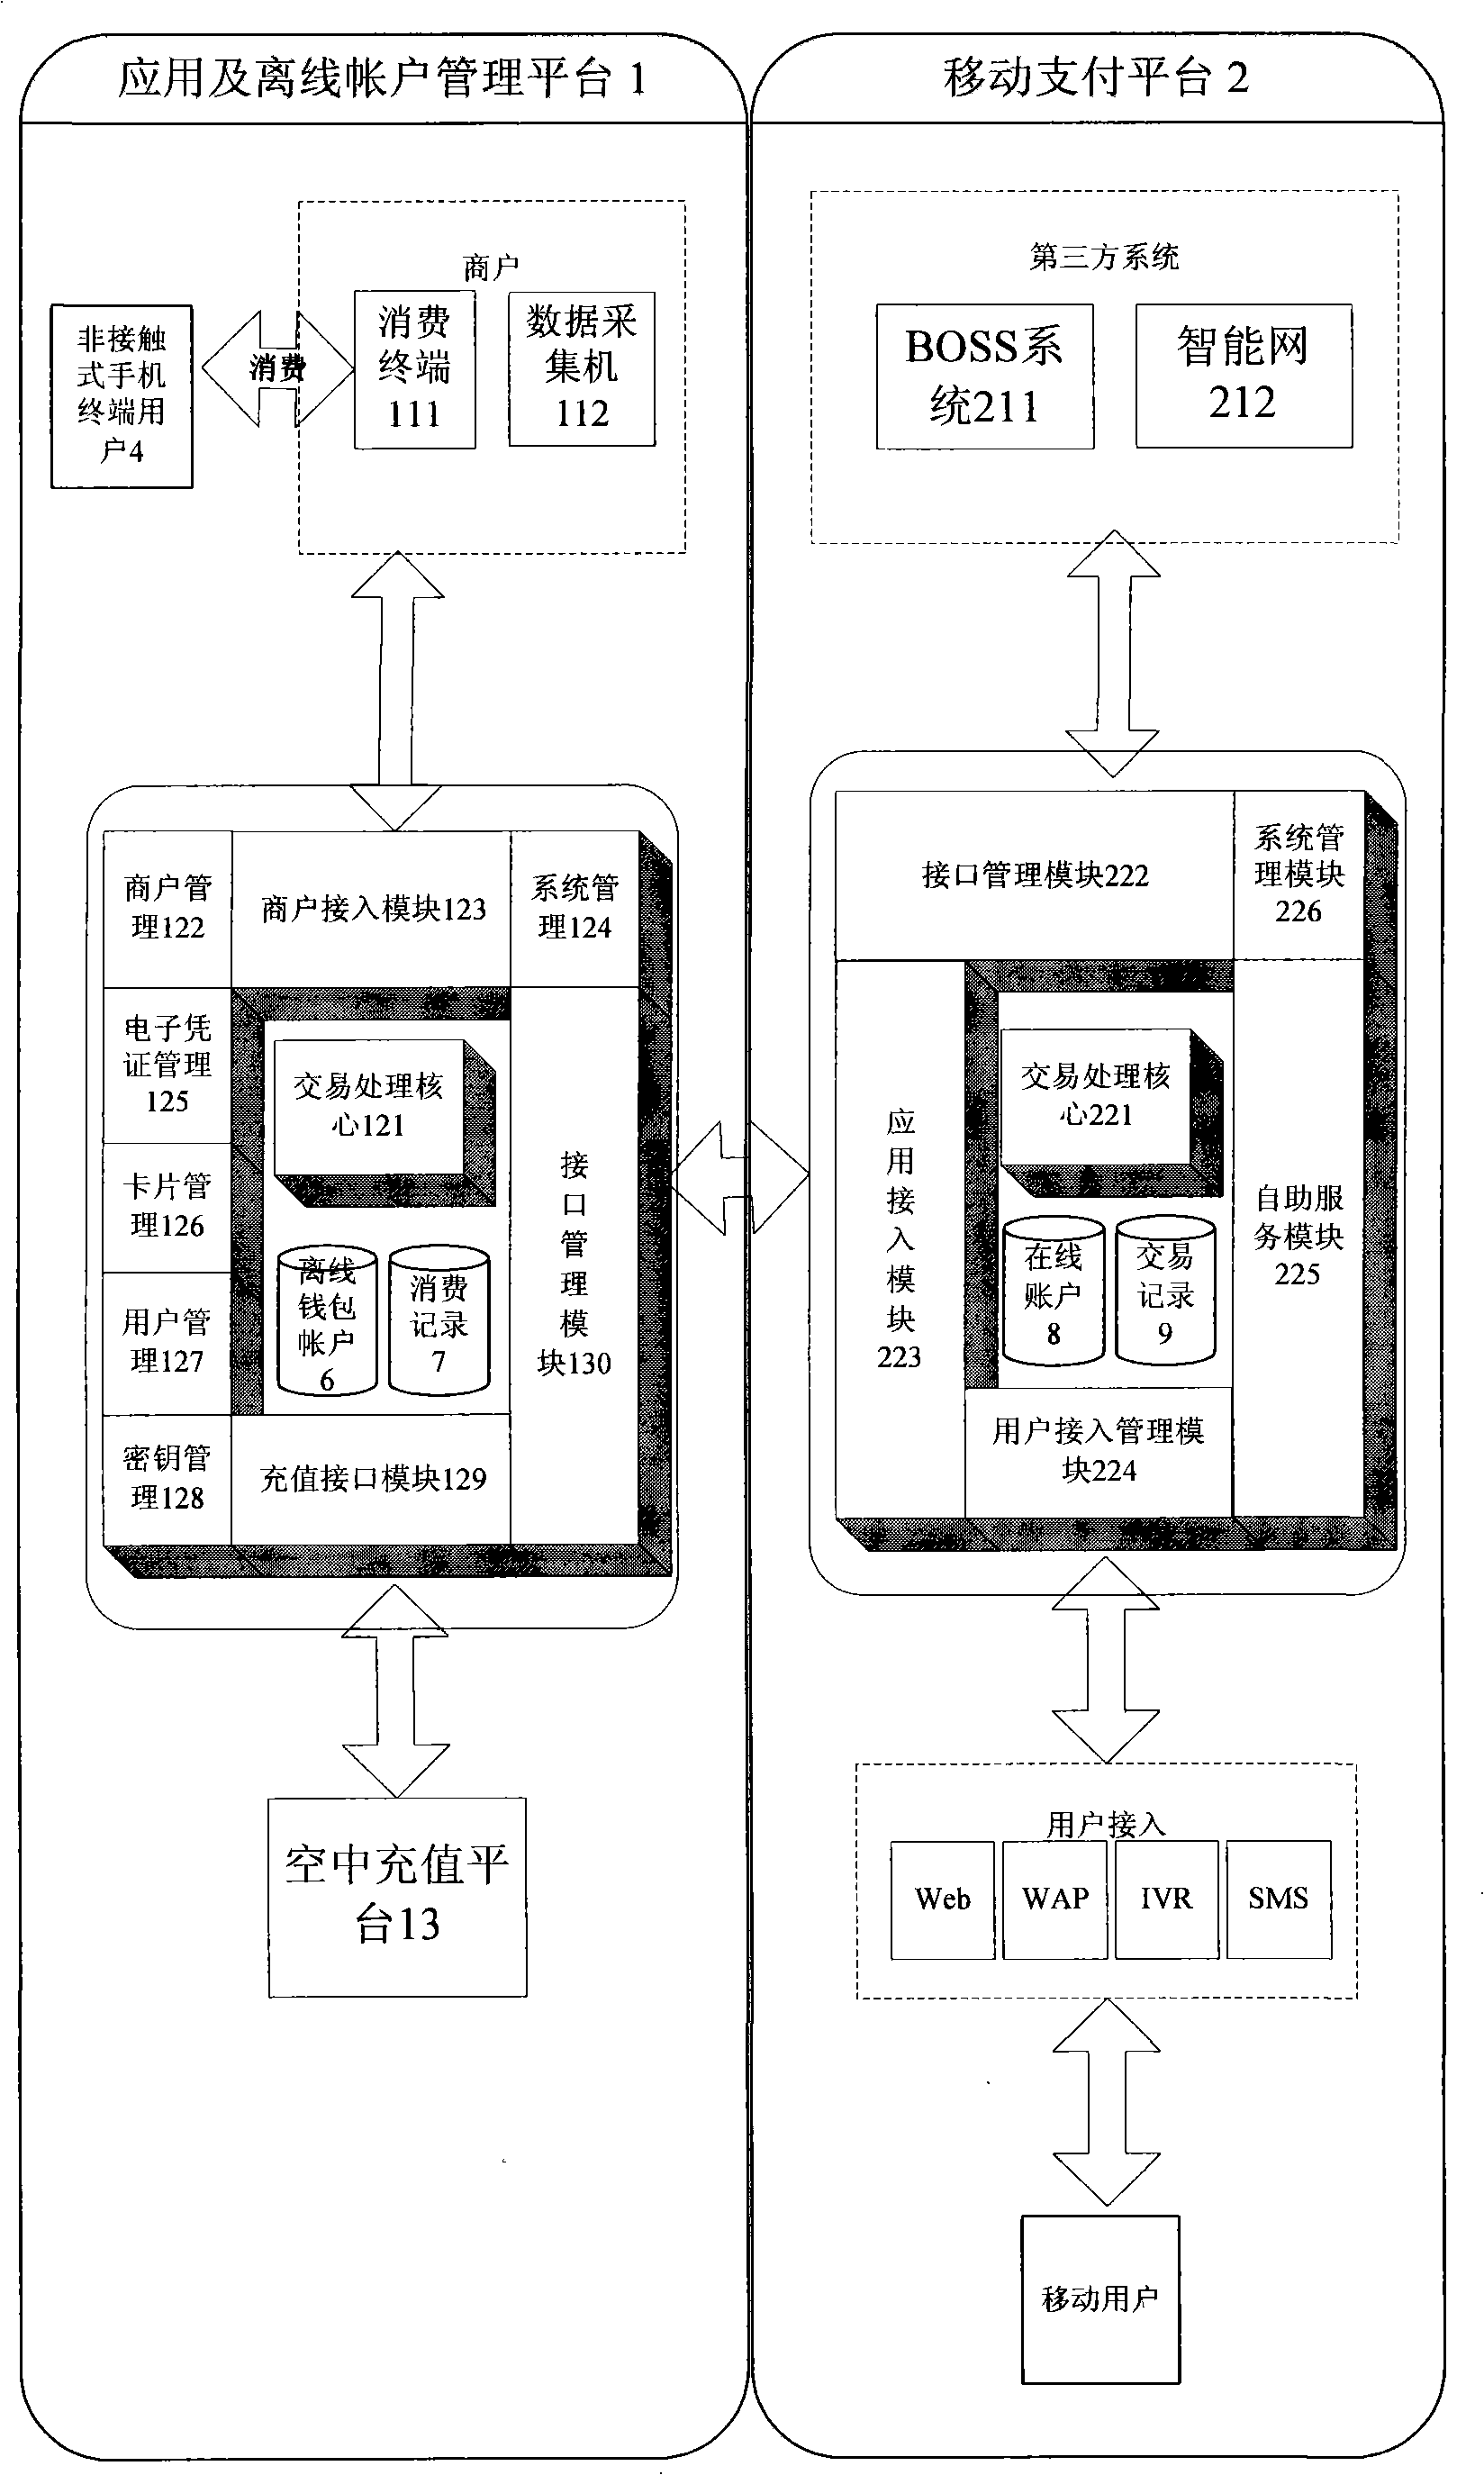 Non-contact card application management system and management method based on mobile communication